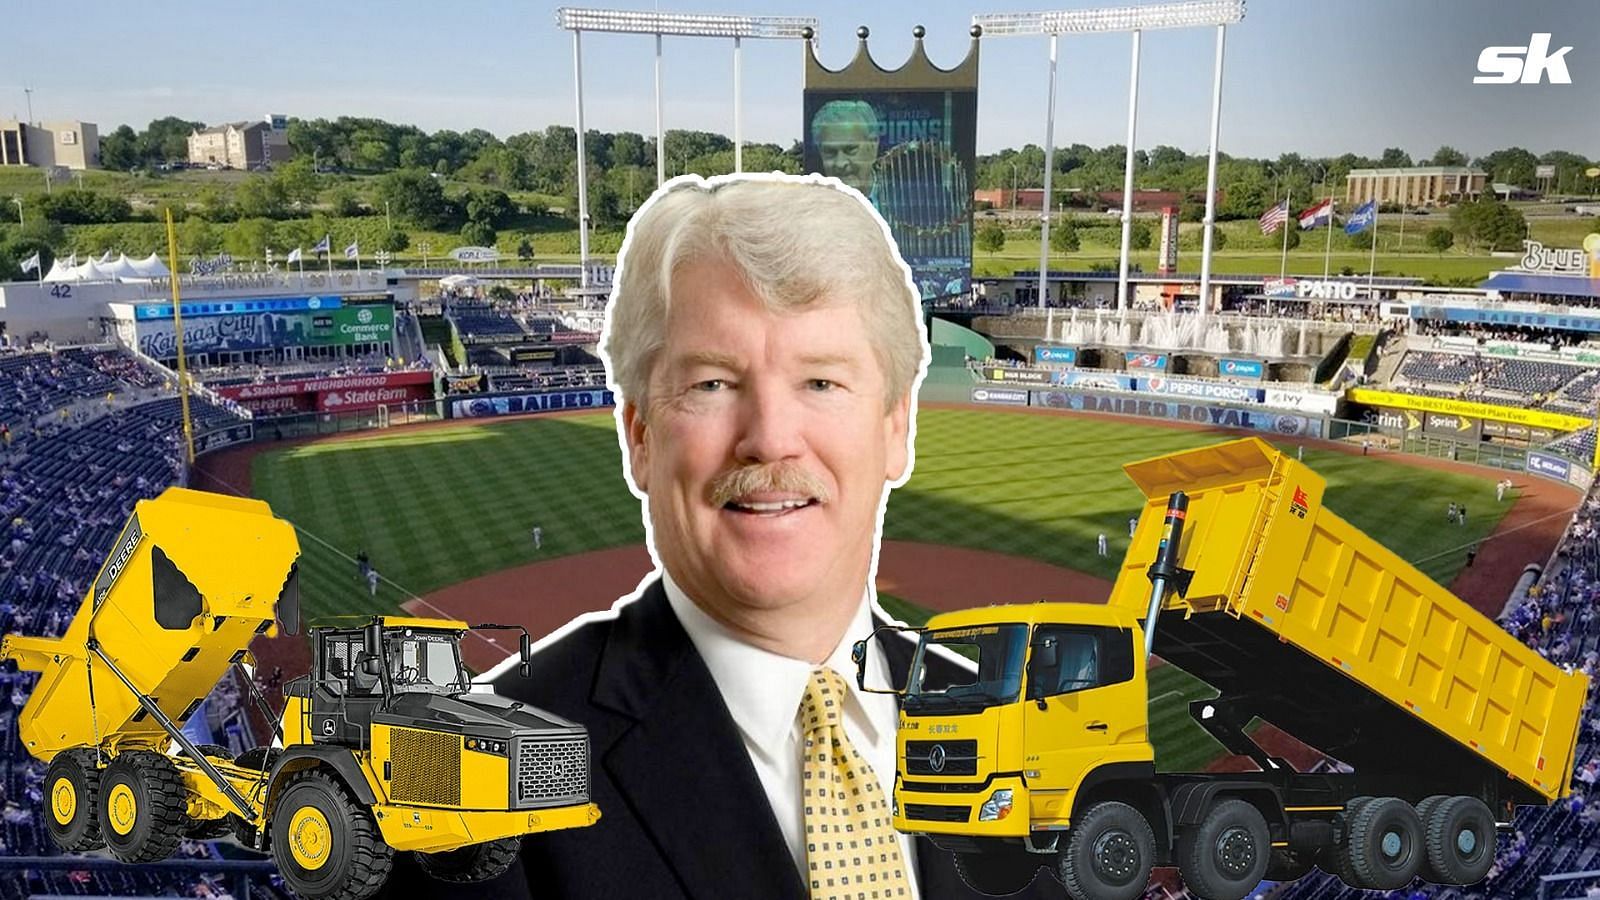 The Royals Have No Good Argument For A New Stadium